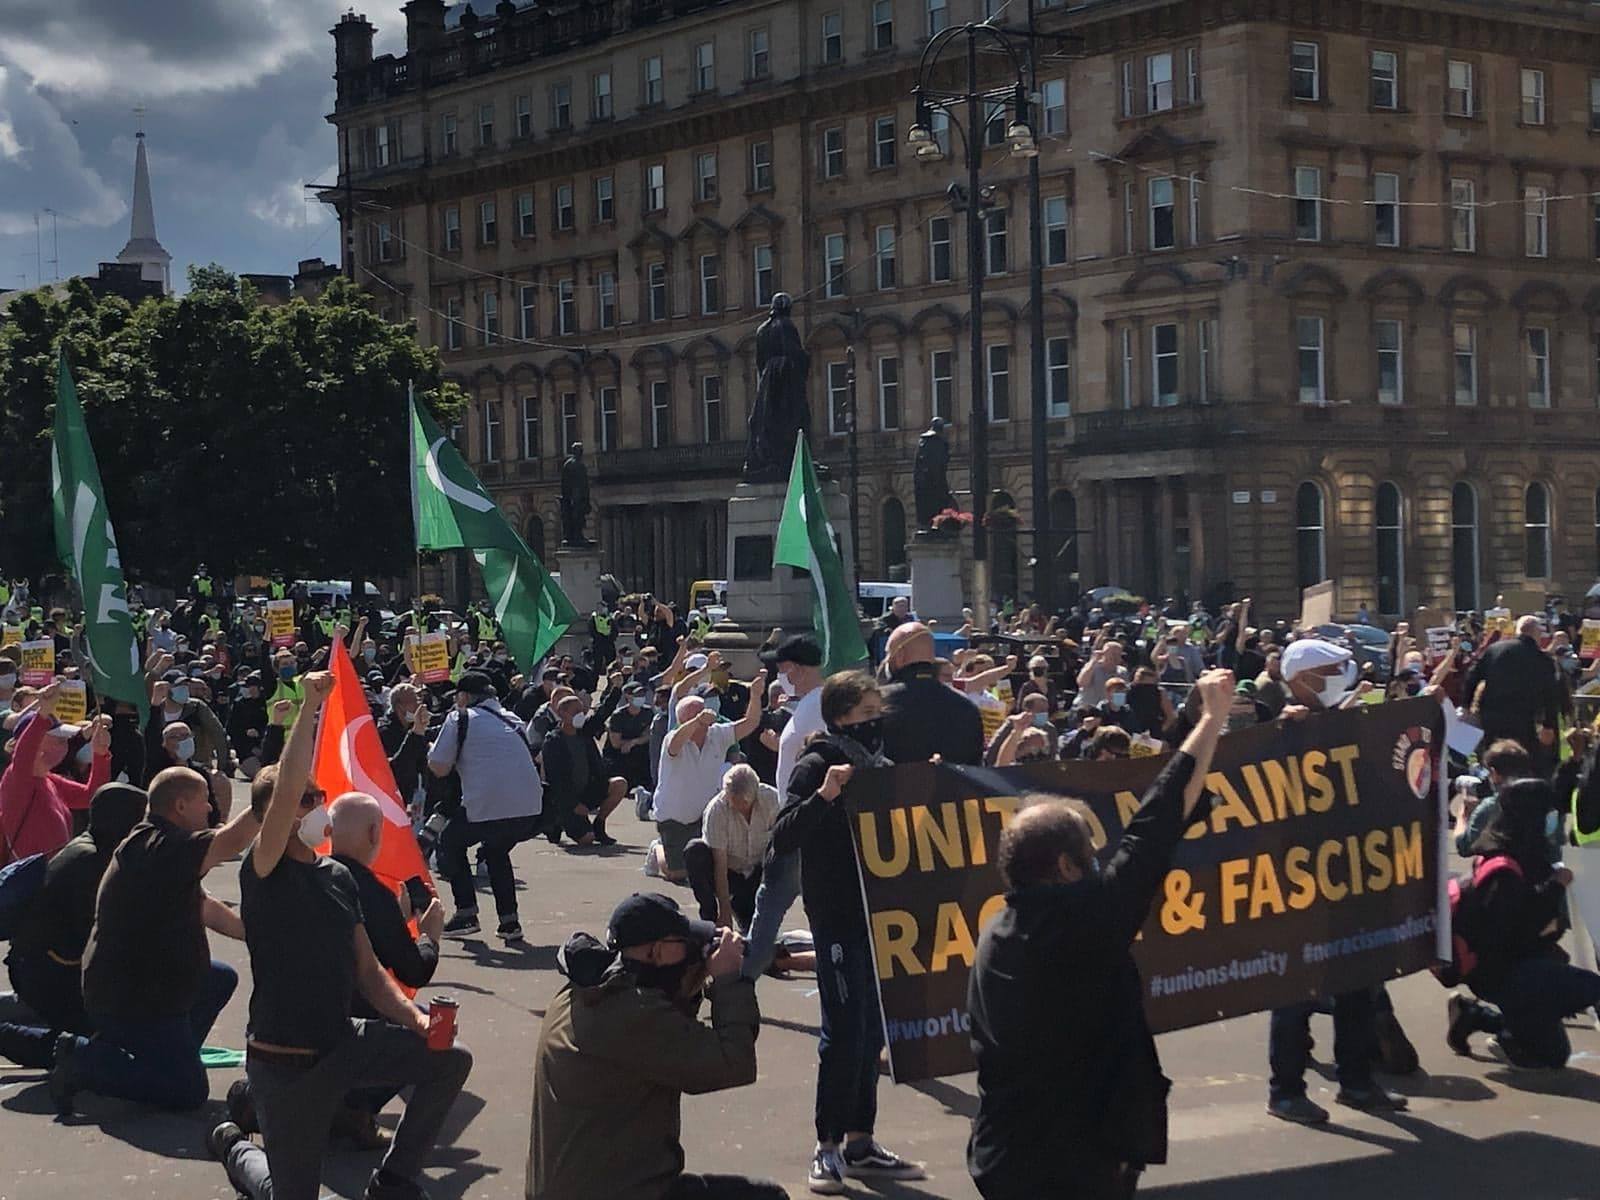 Glasgow Says No to Racism event.